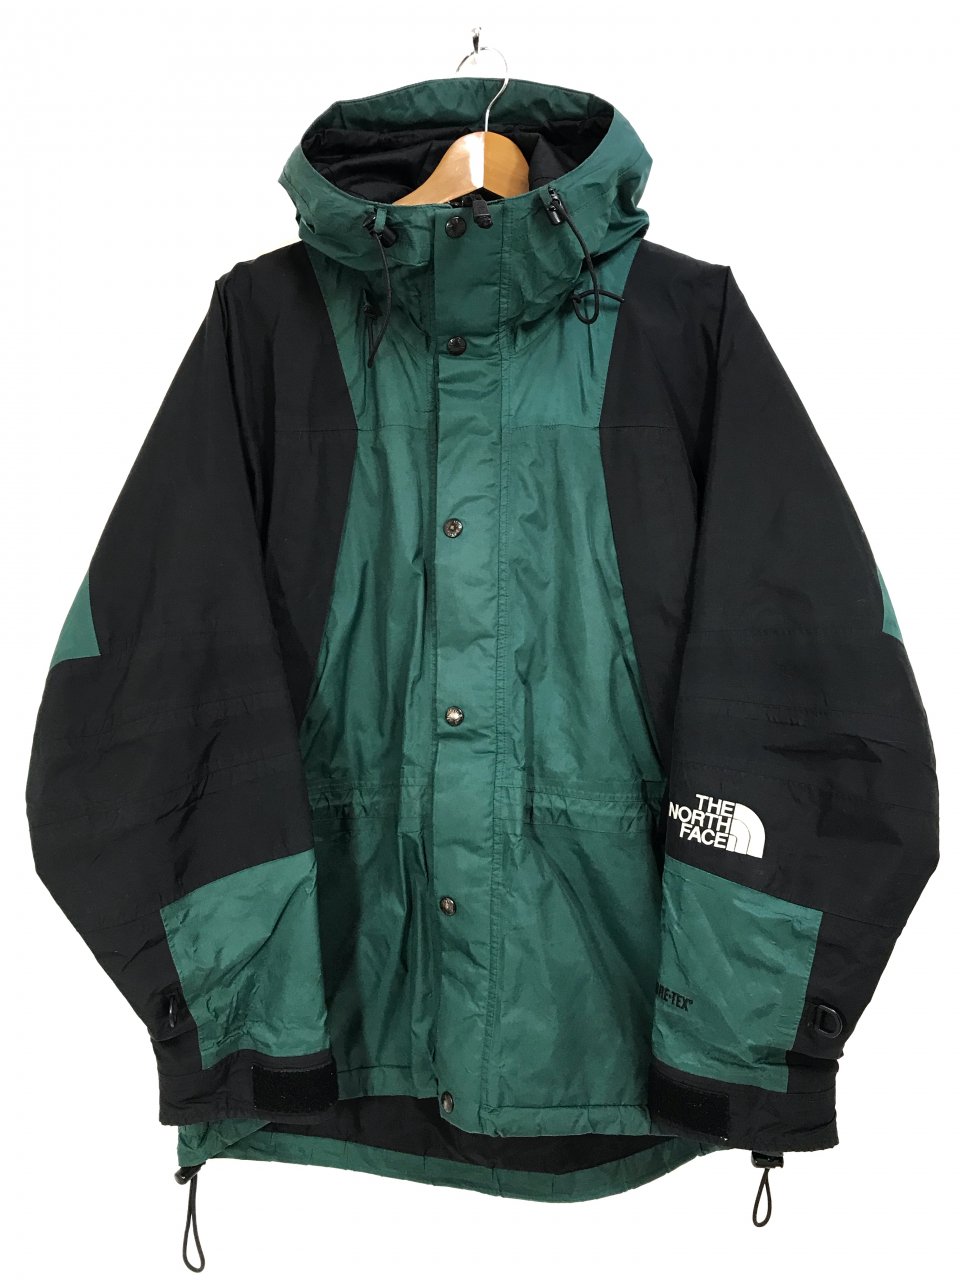 s THE NORTH FACE Mountain Light Jacket 緑黒 S ノースフェイス